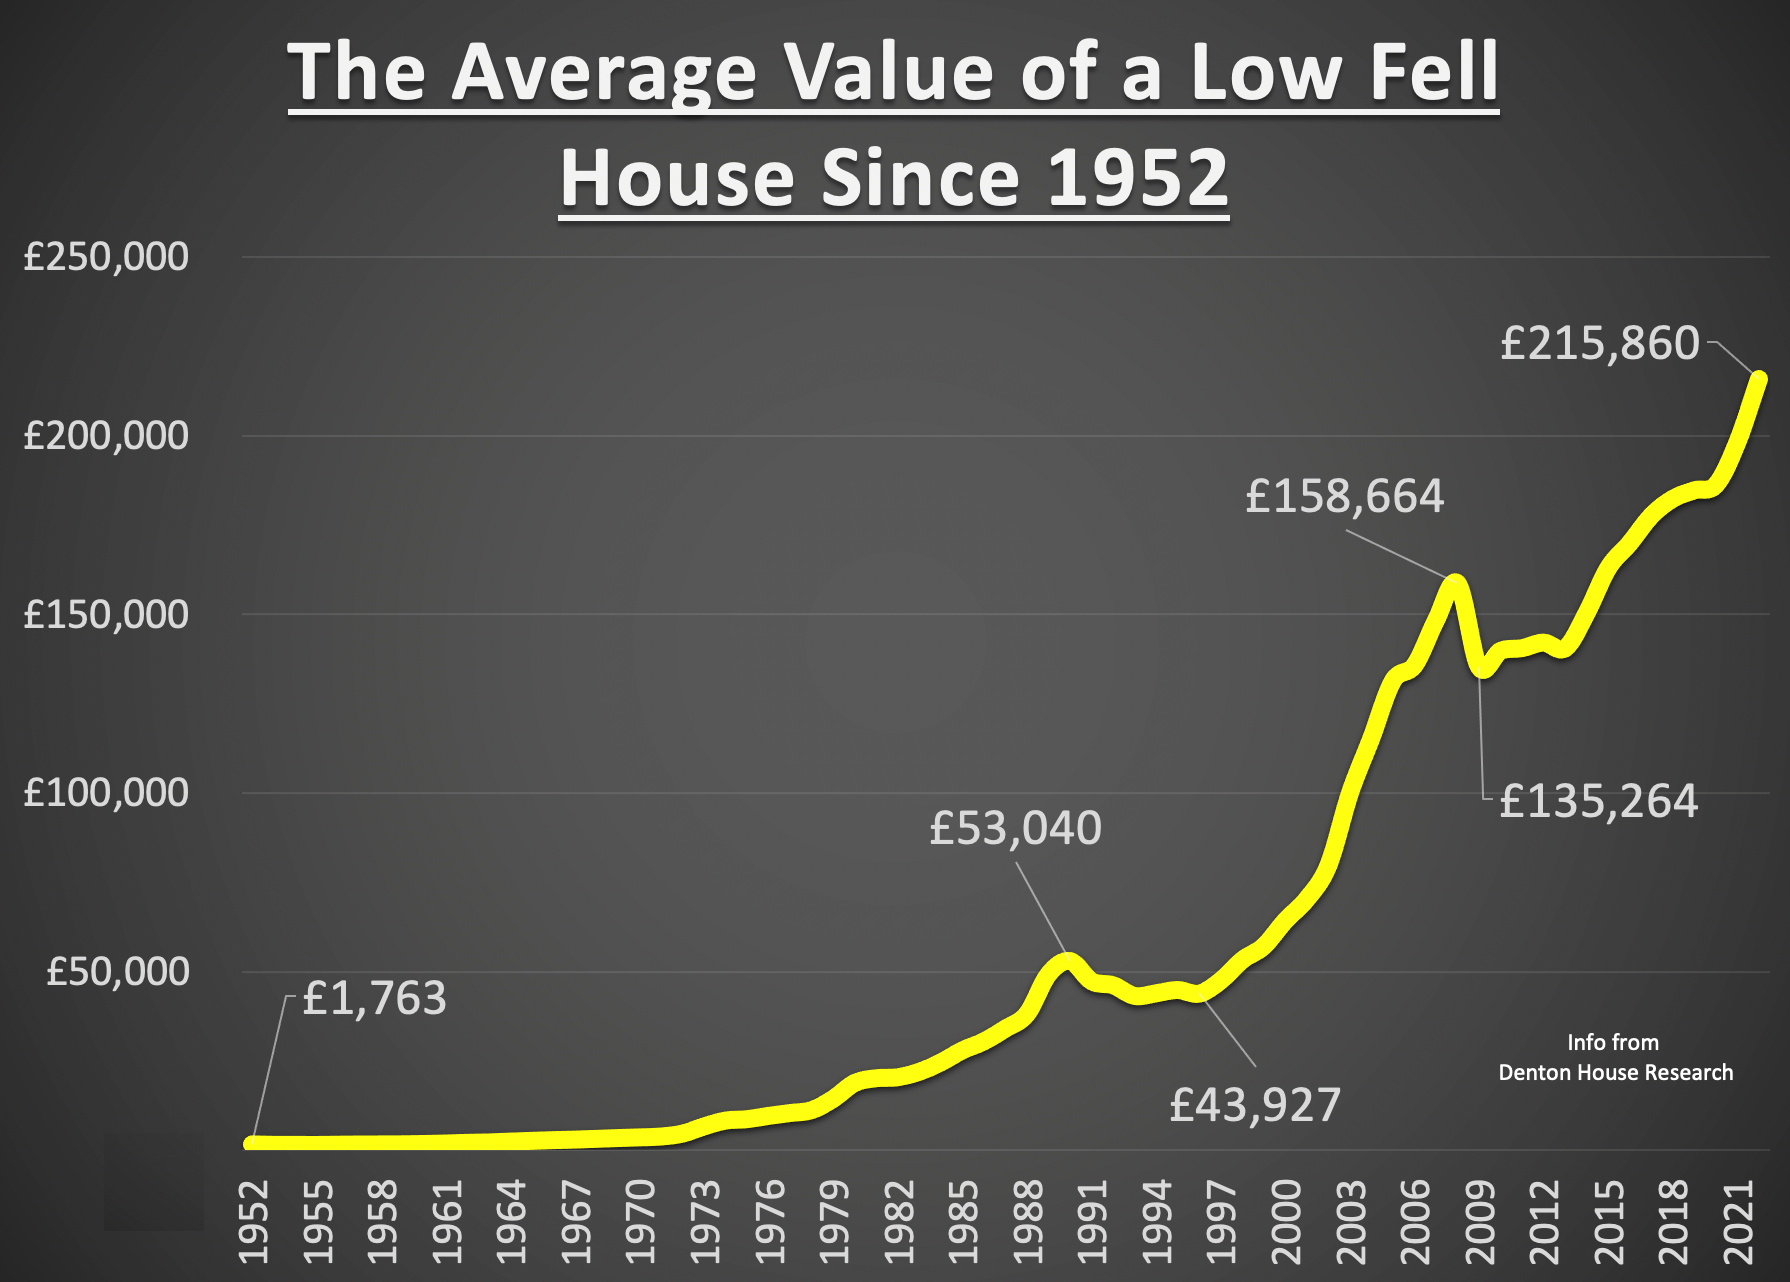 The Average Value of a Low Fell House Since 1952